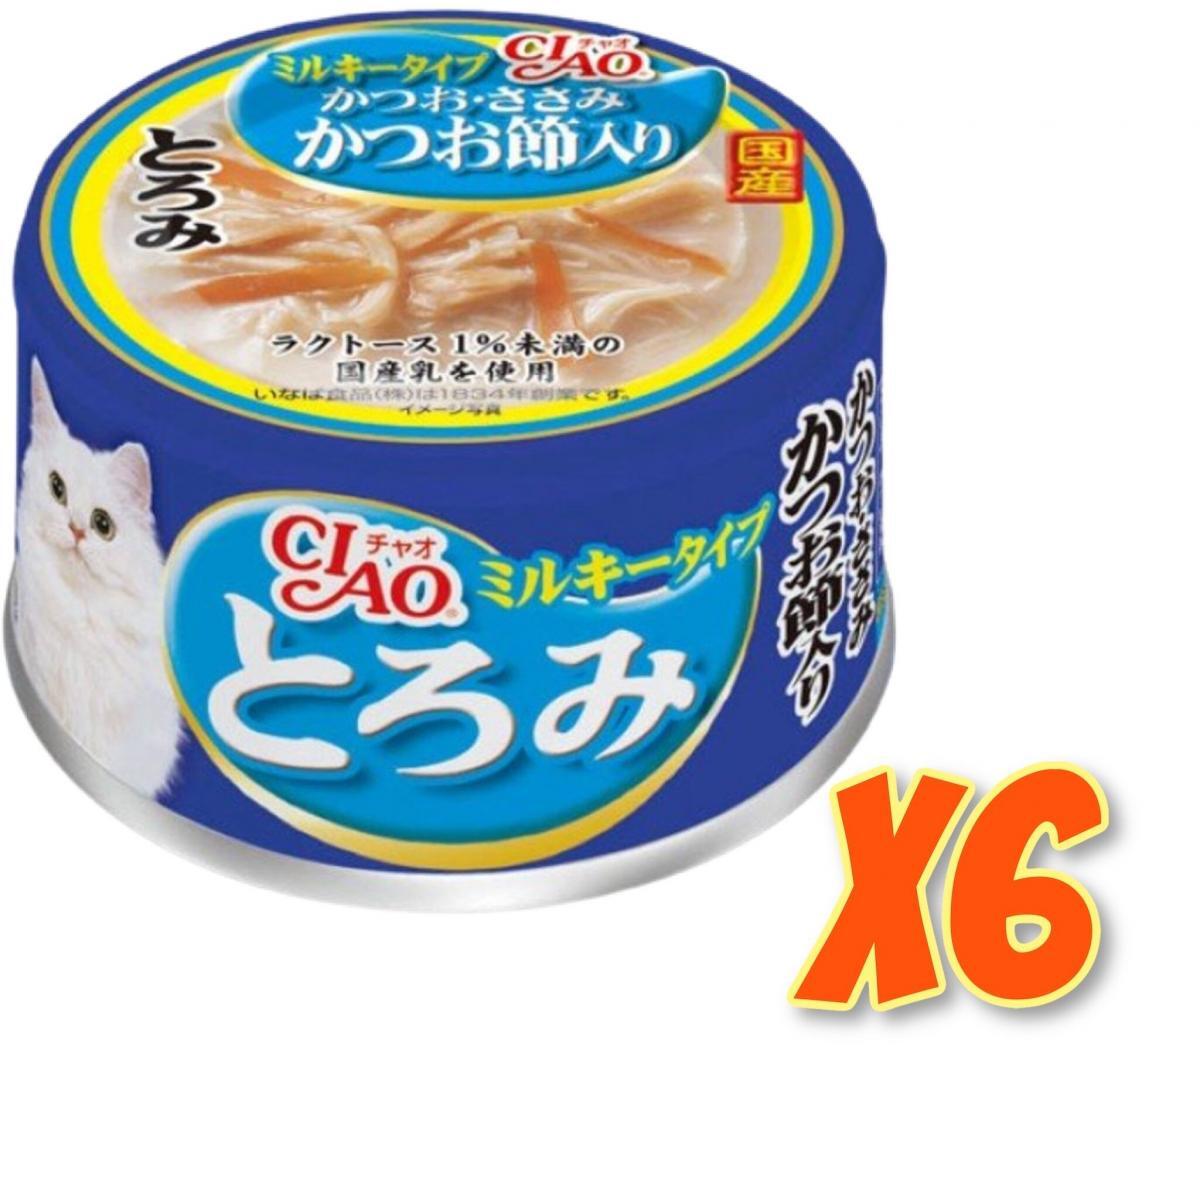 White Soup Series with Bonito, Chicken and Bonito Flakes (80g x6) Cat Can A113